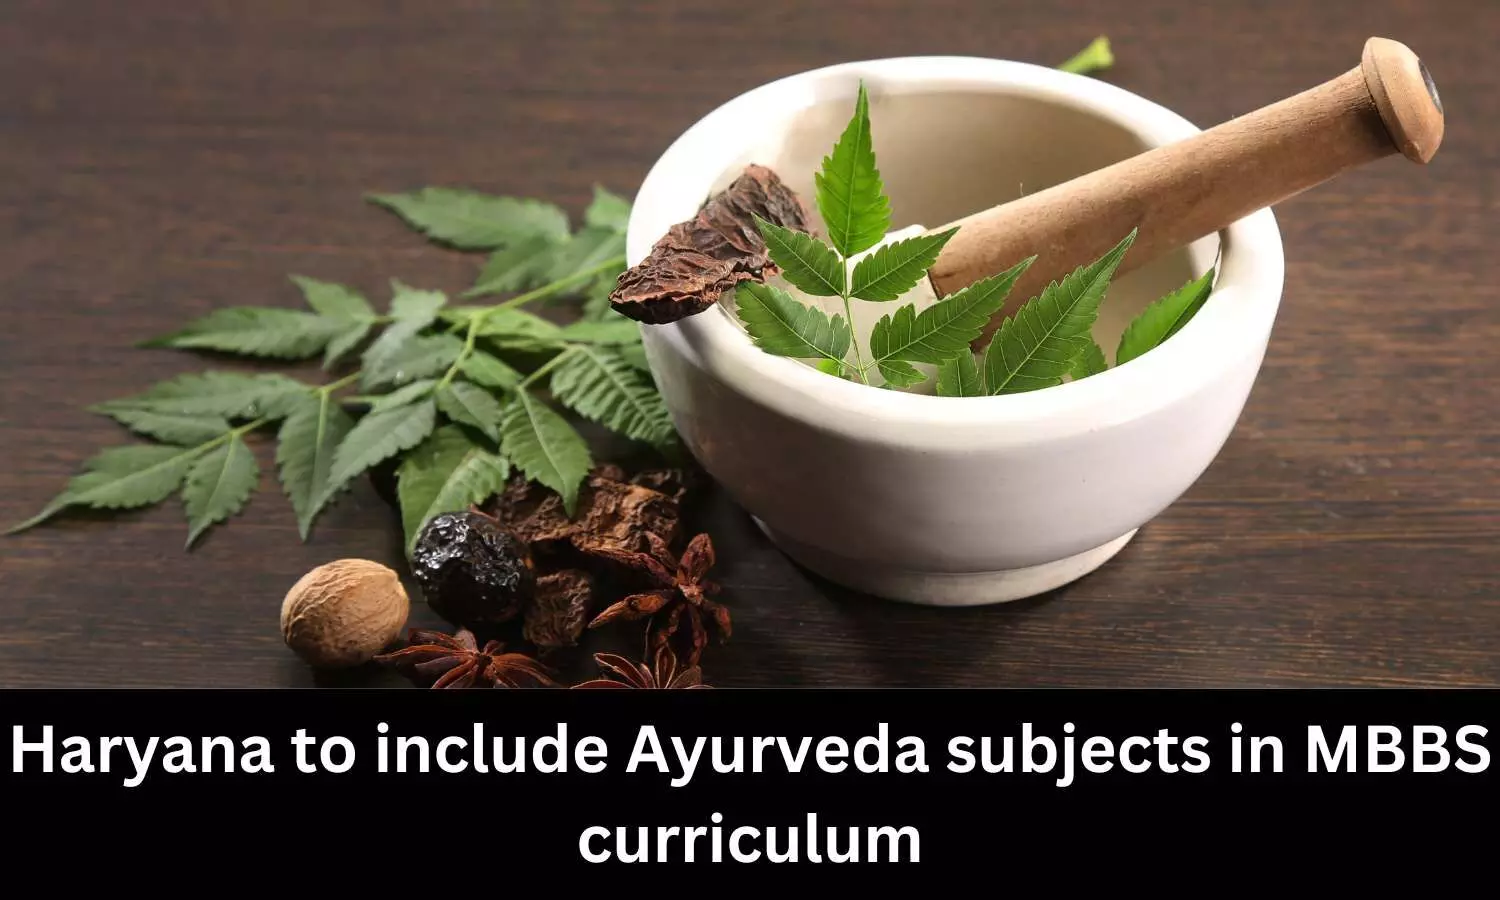 Haryana plans to include ayurveda in MBBS course